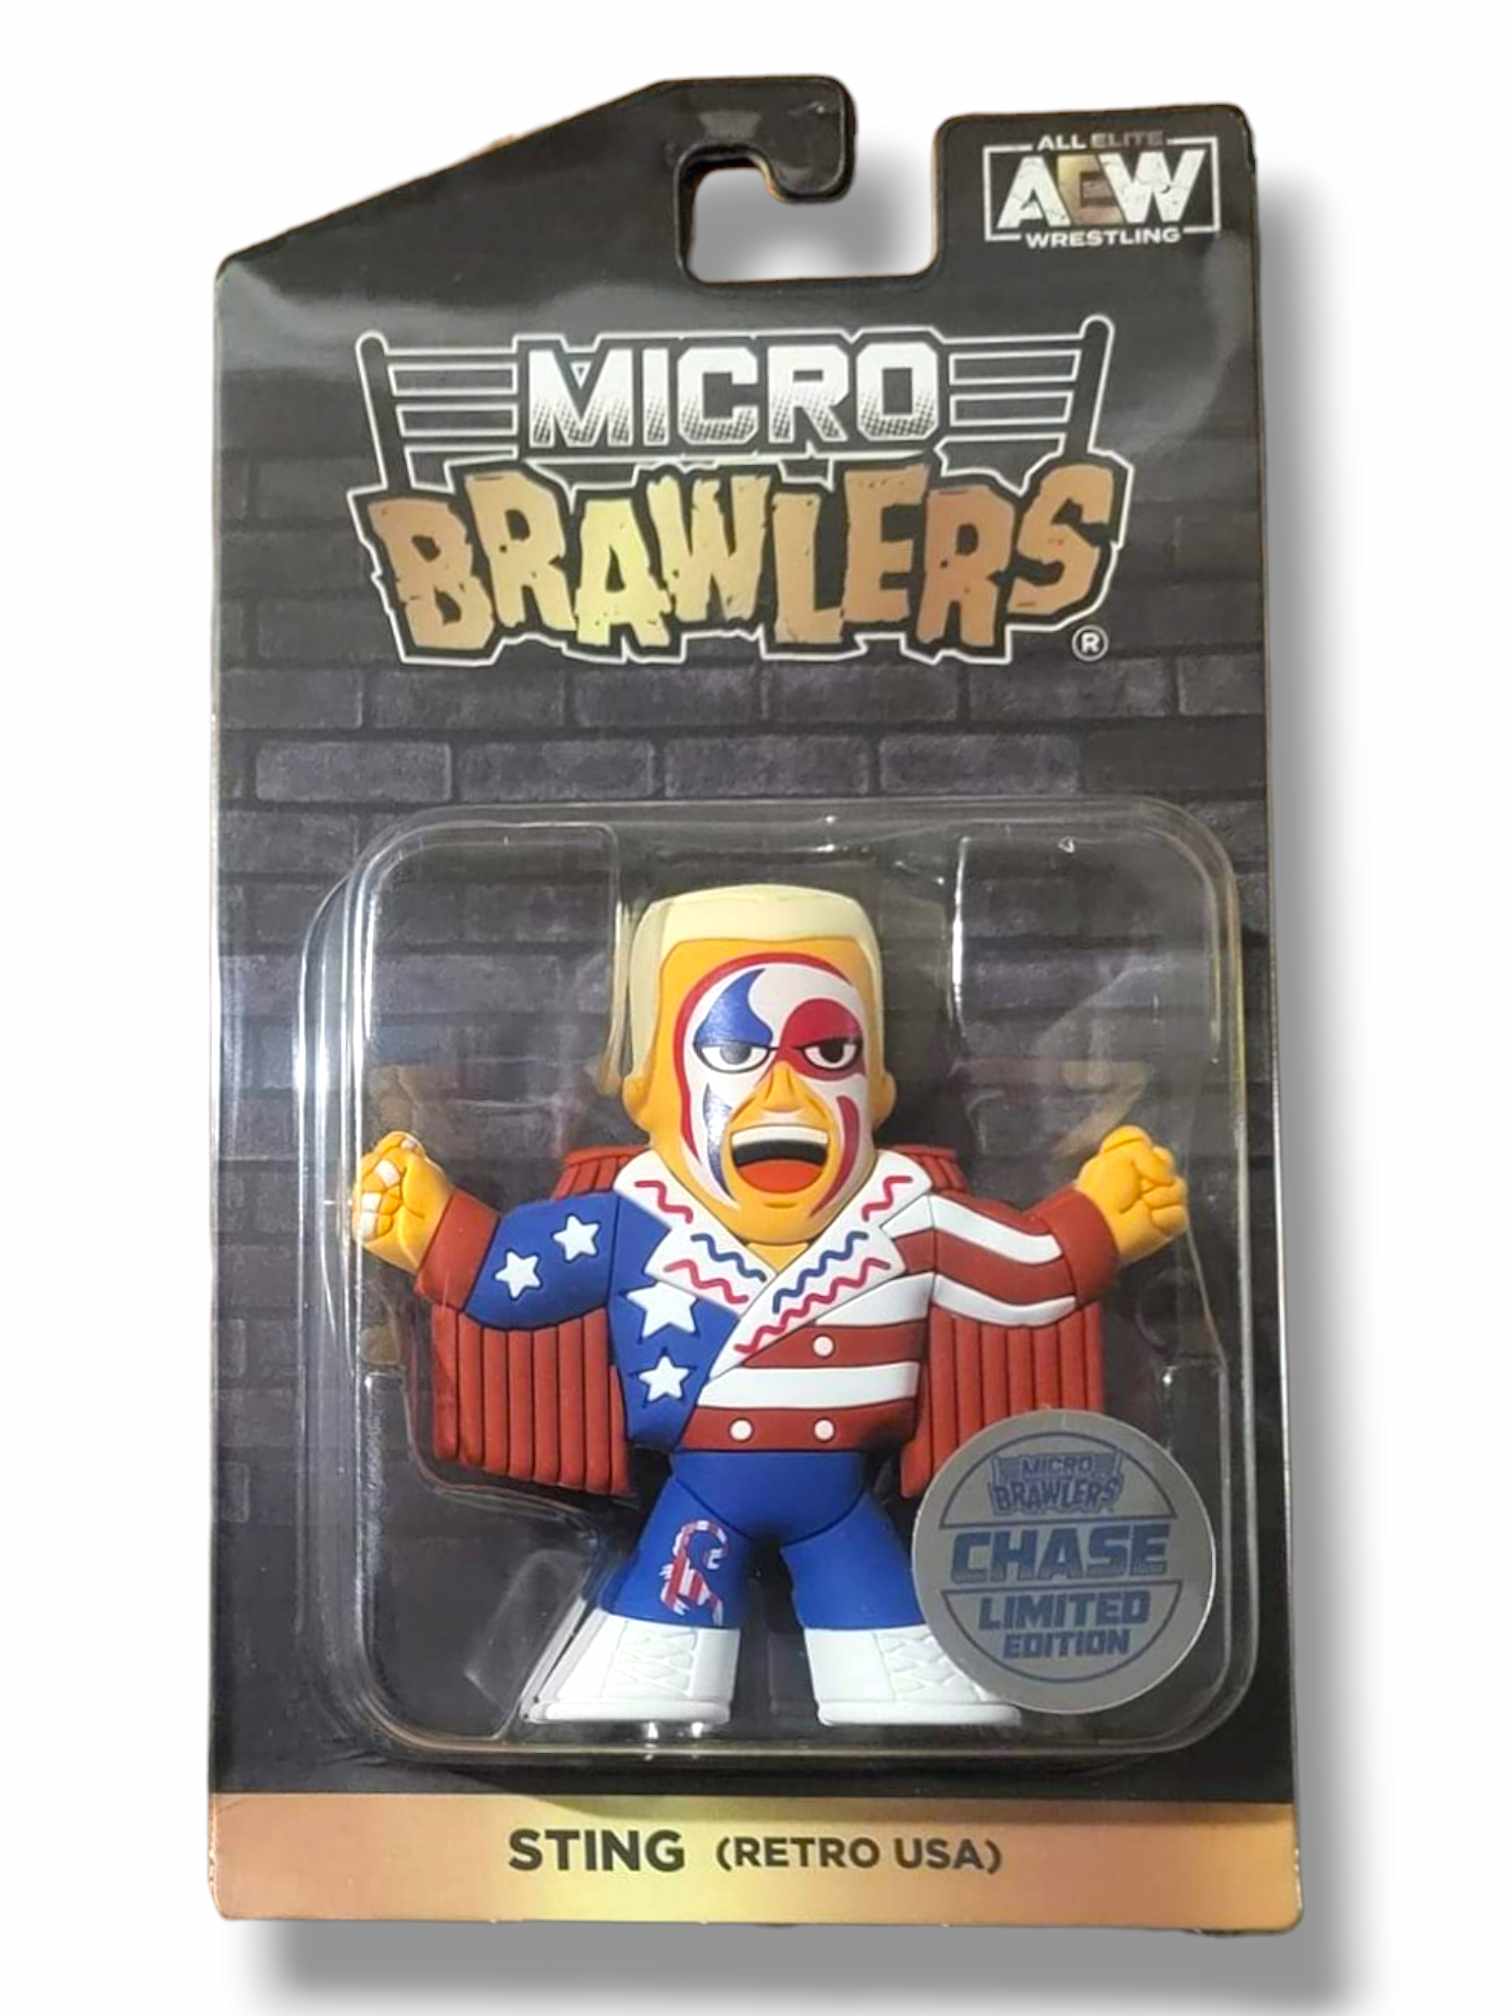 2023 AEW Pro Wrestling Tees Micro Brawlers Limited Edition Sting